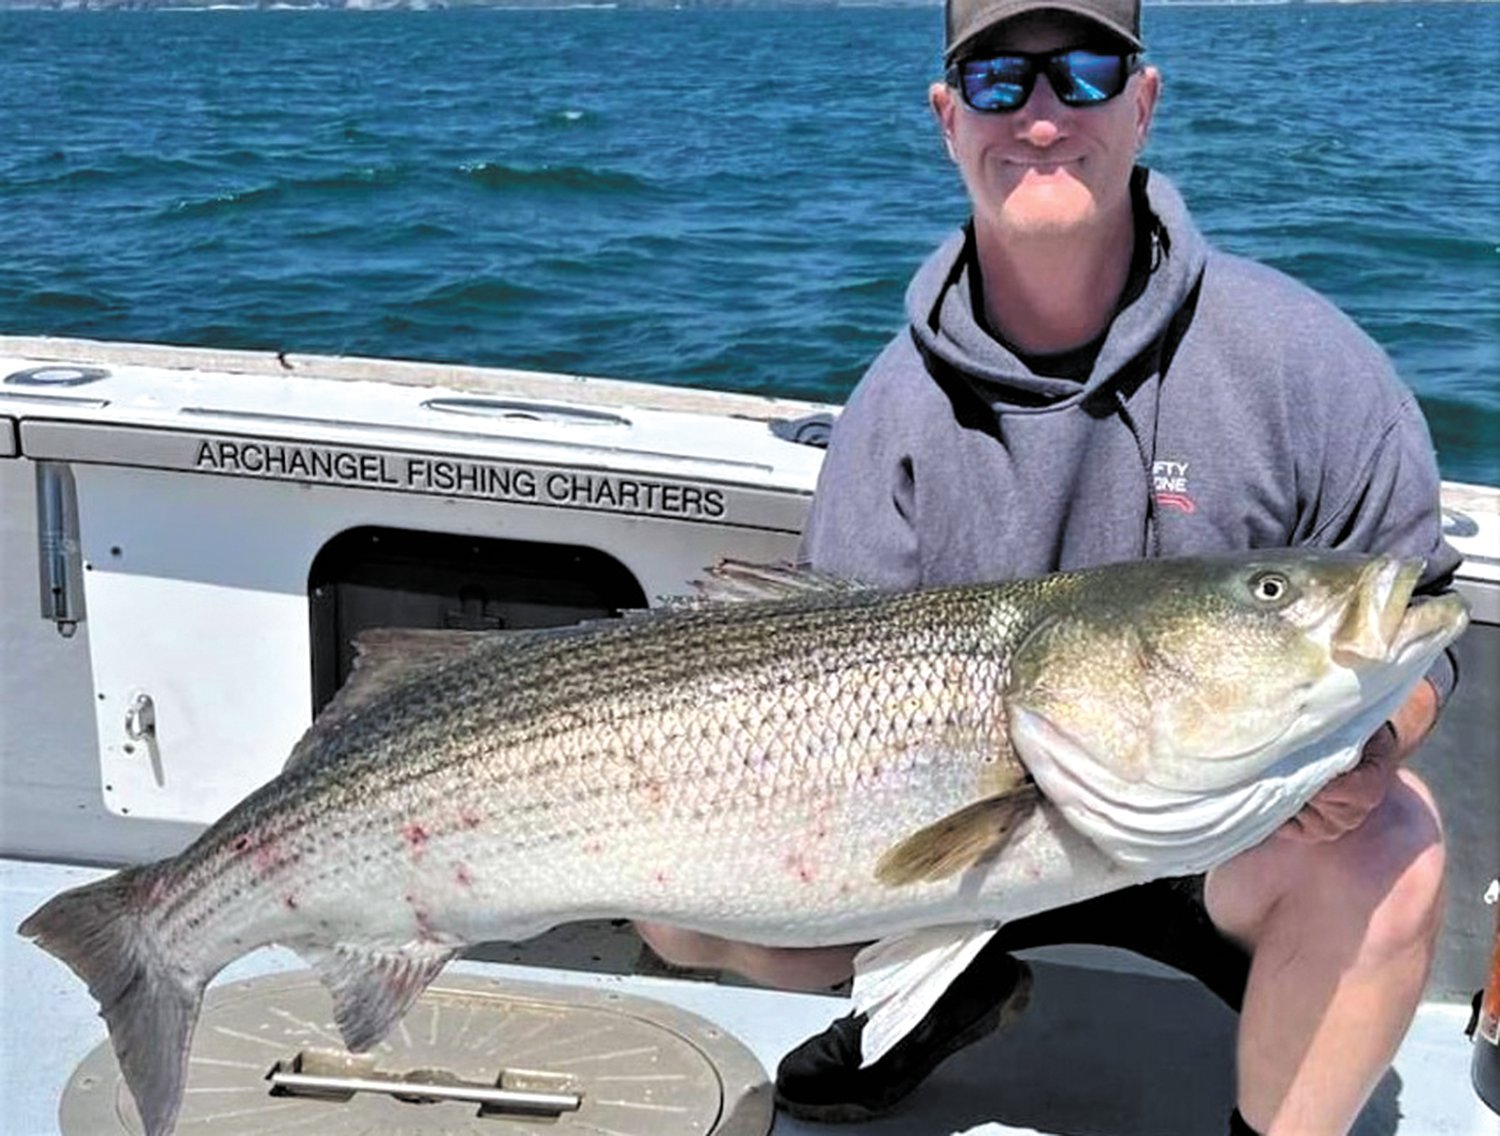 BIG BASS: Capt. Mike Littlefield of Archangel Charters, Newport, caught this 55 pound striped bass last week.